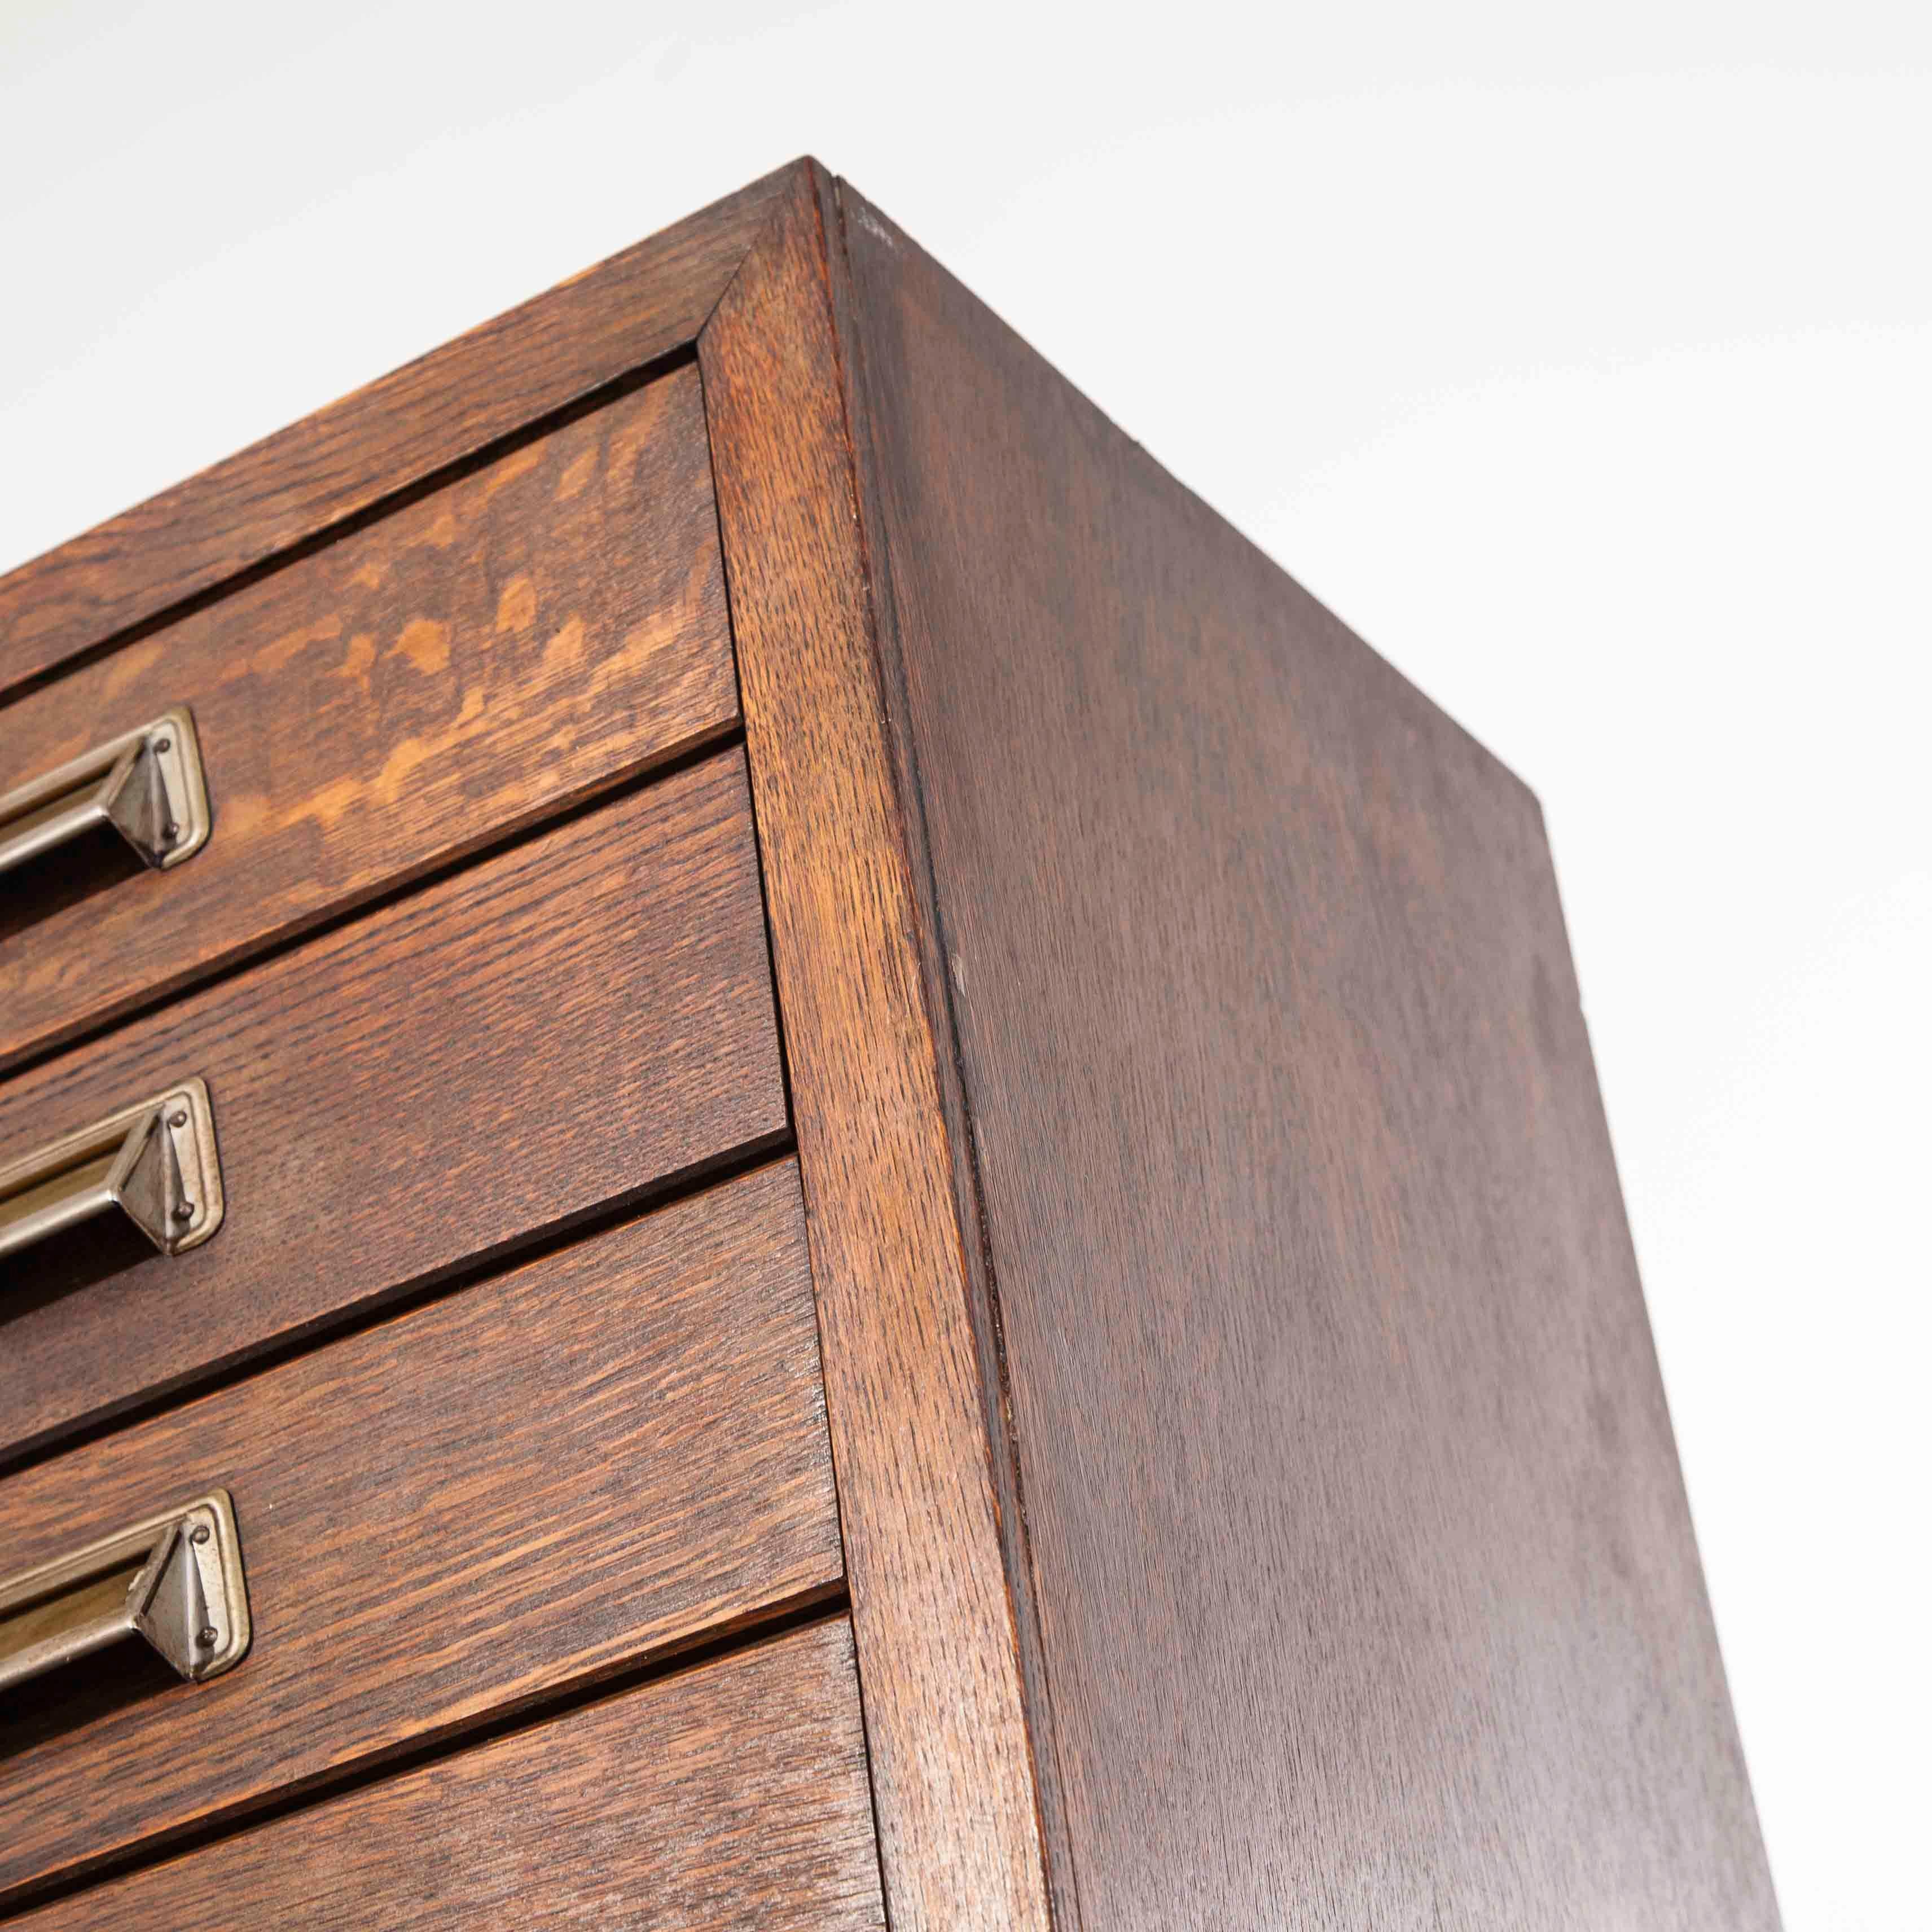 1950s Oak Apothecary Multi Drawer Chest of Drawers, Thirty Nine Drawers 4